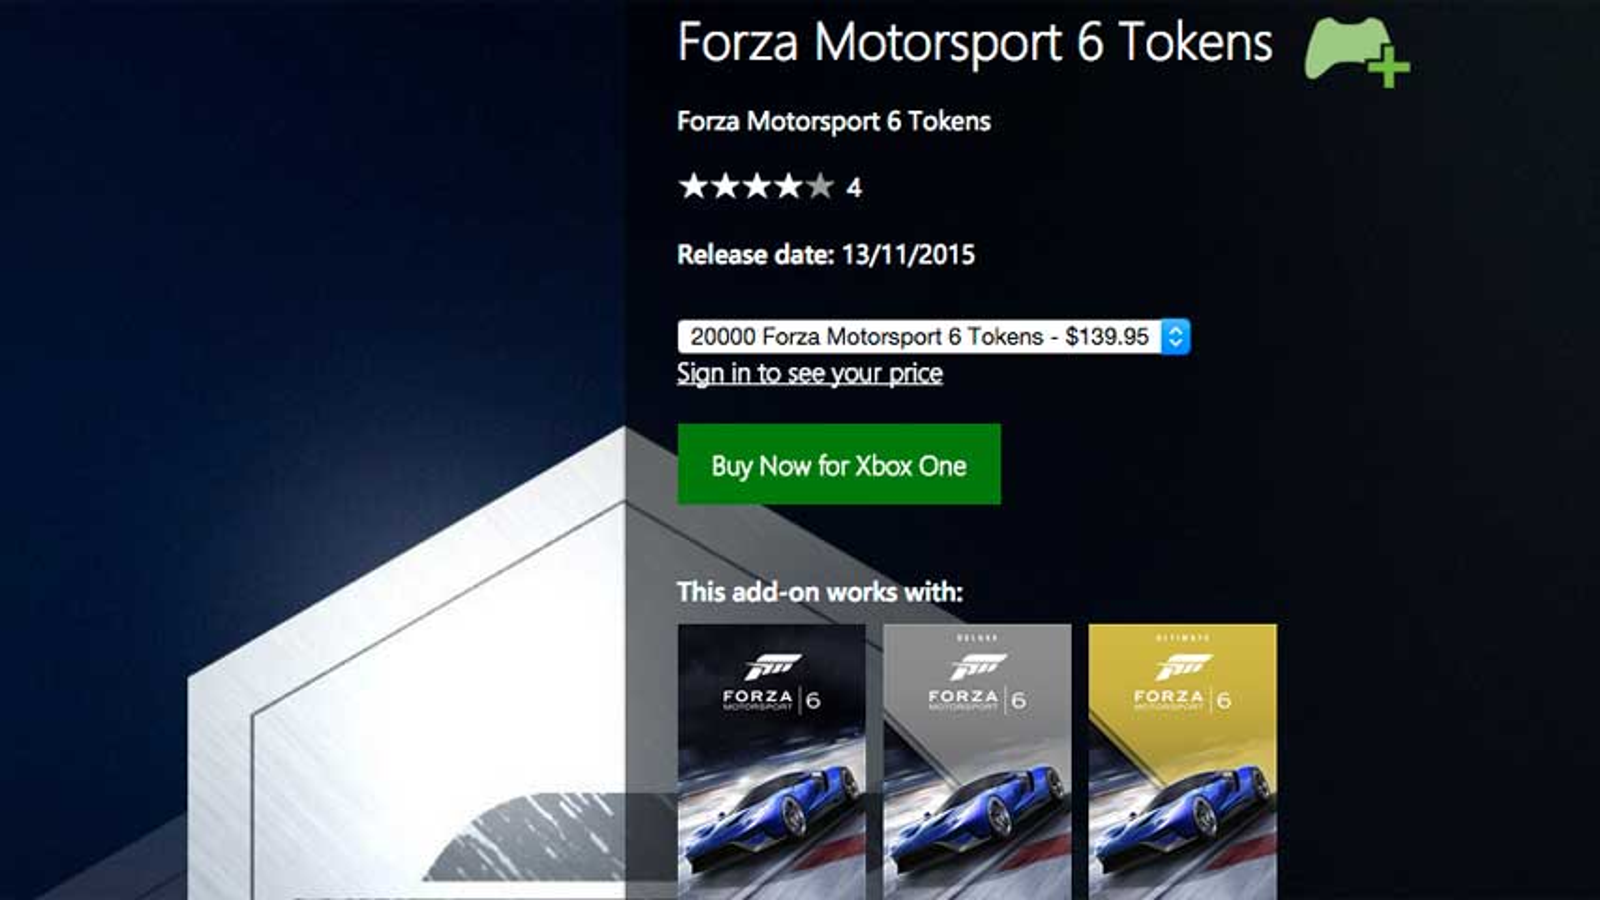 Forza Motorsport 6 to be pulled from Xbox Live Marketplace on